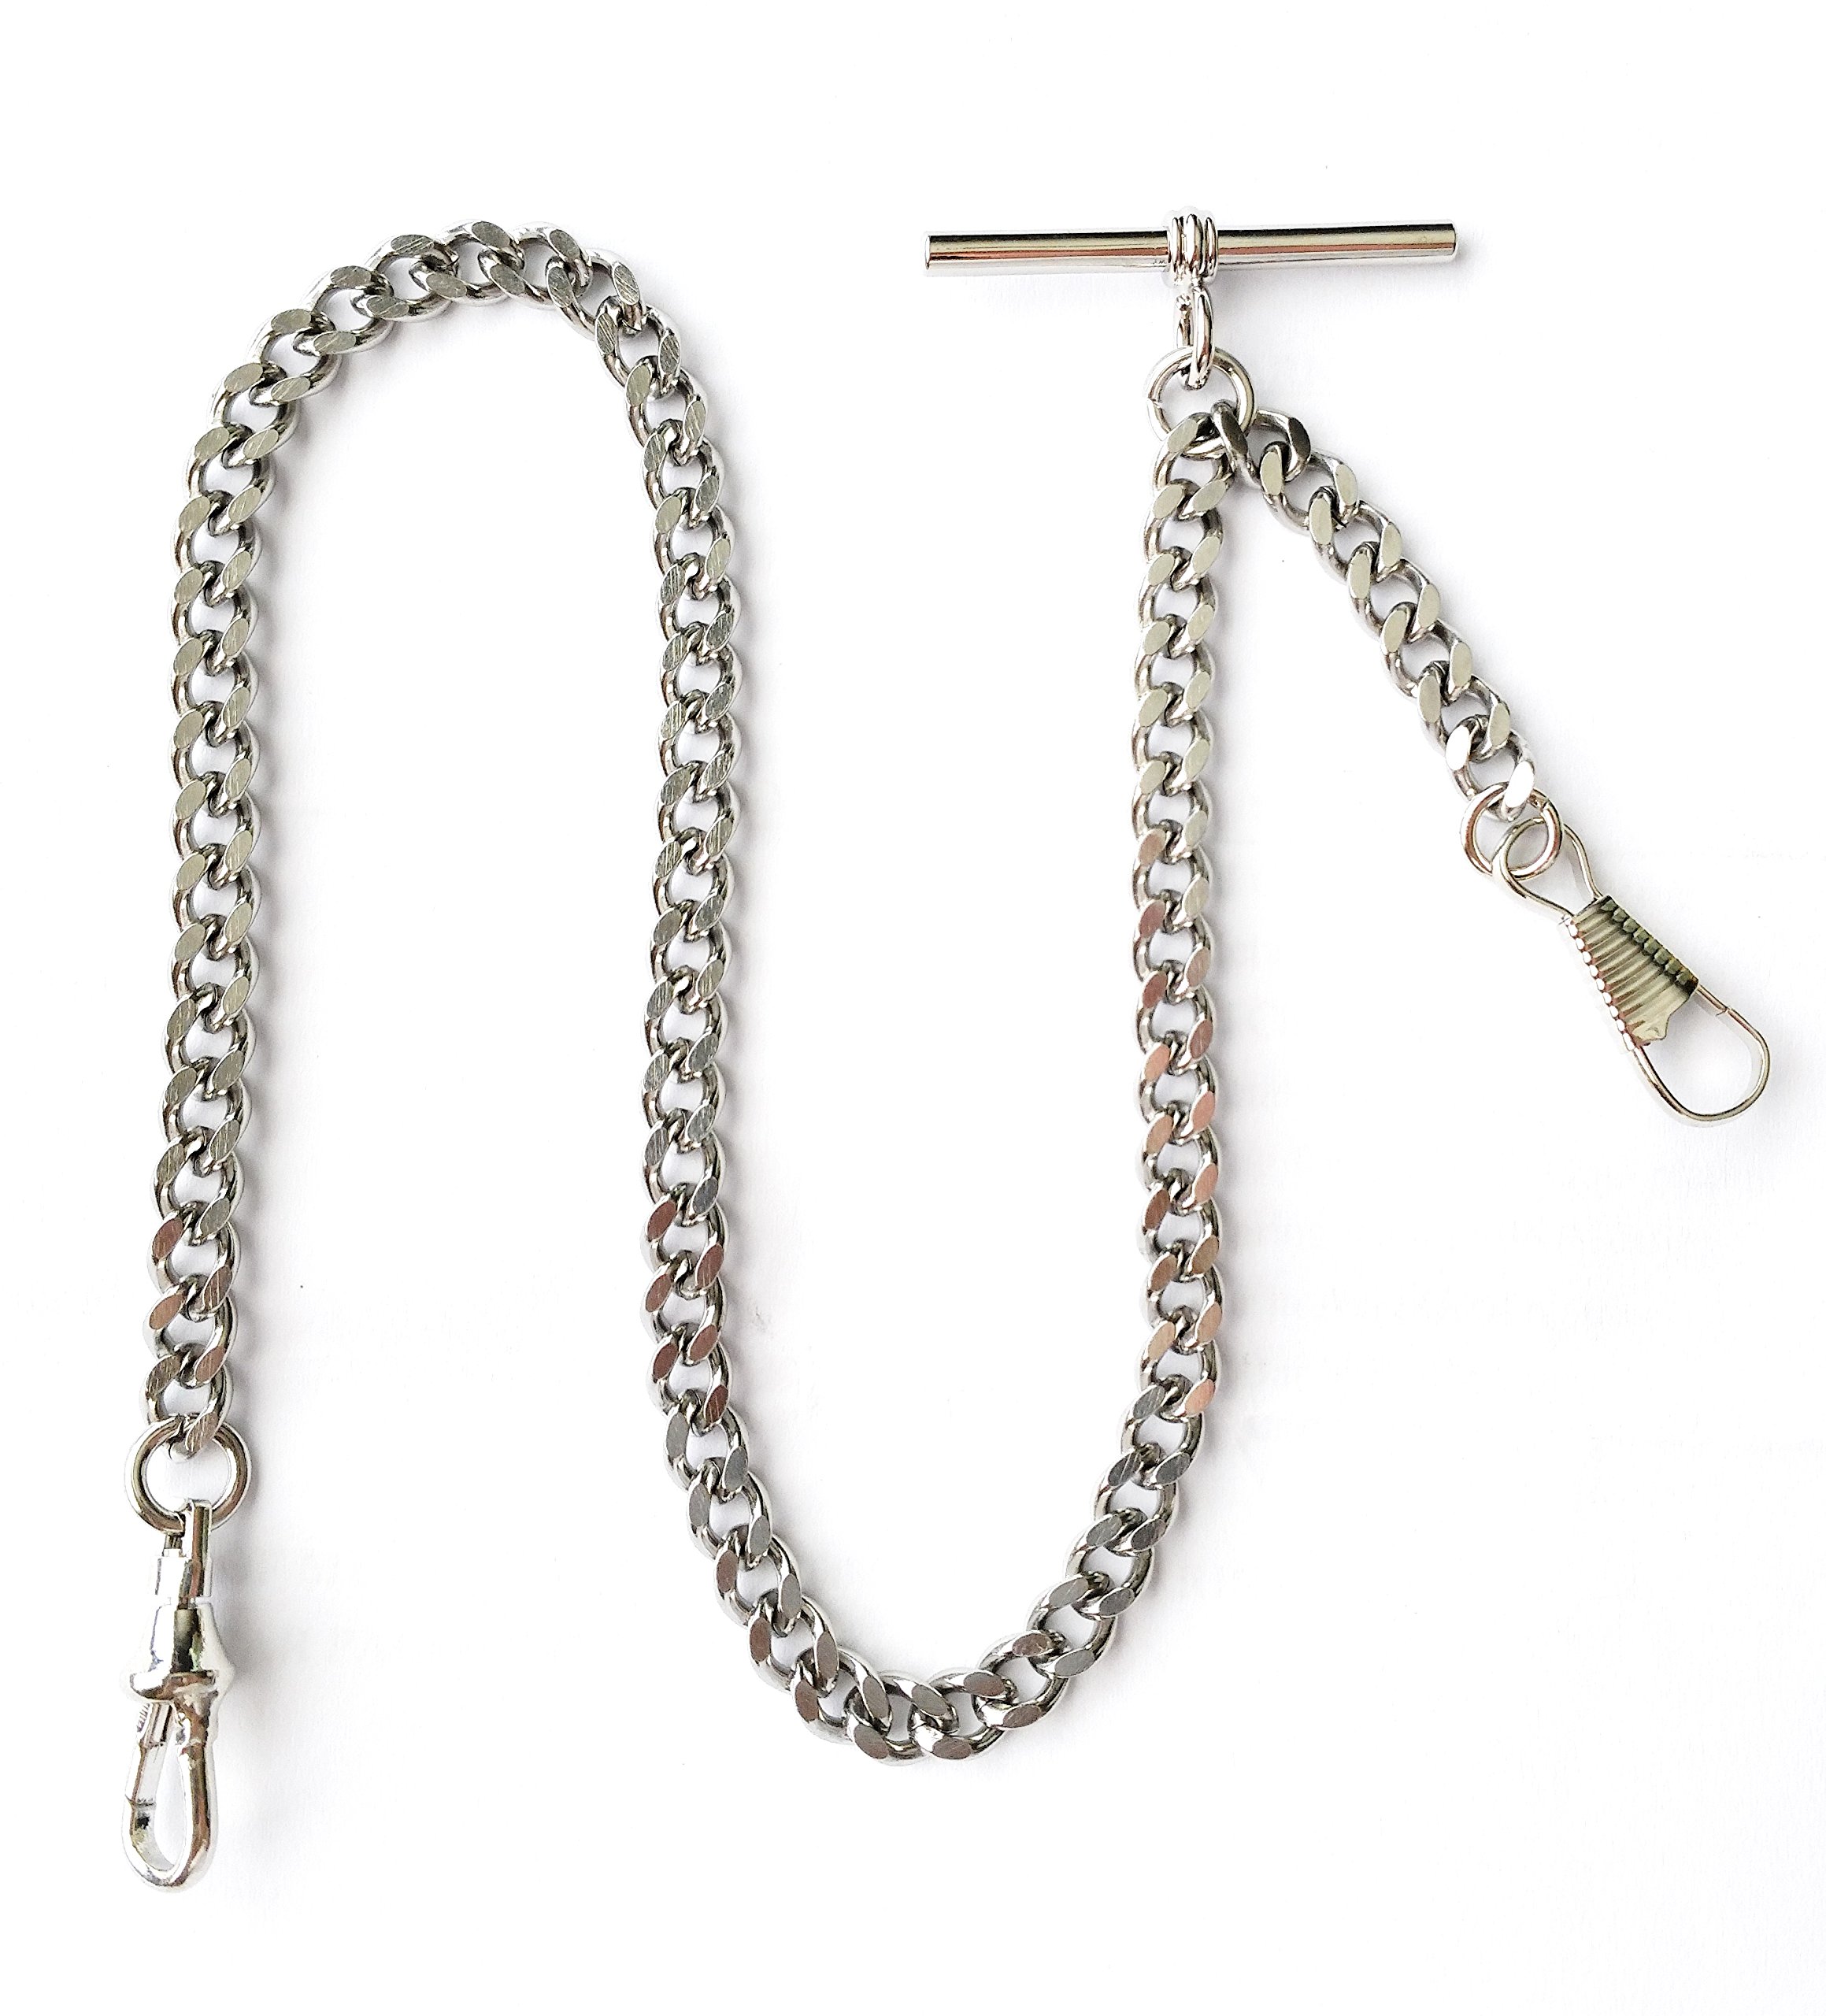 Dueber Deluxe Silver Chrome Single Albert Pocket Watch Chain Fob Drop Attachment USA